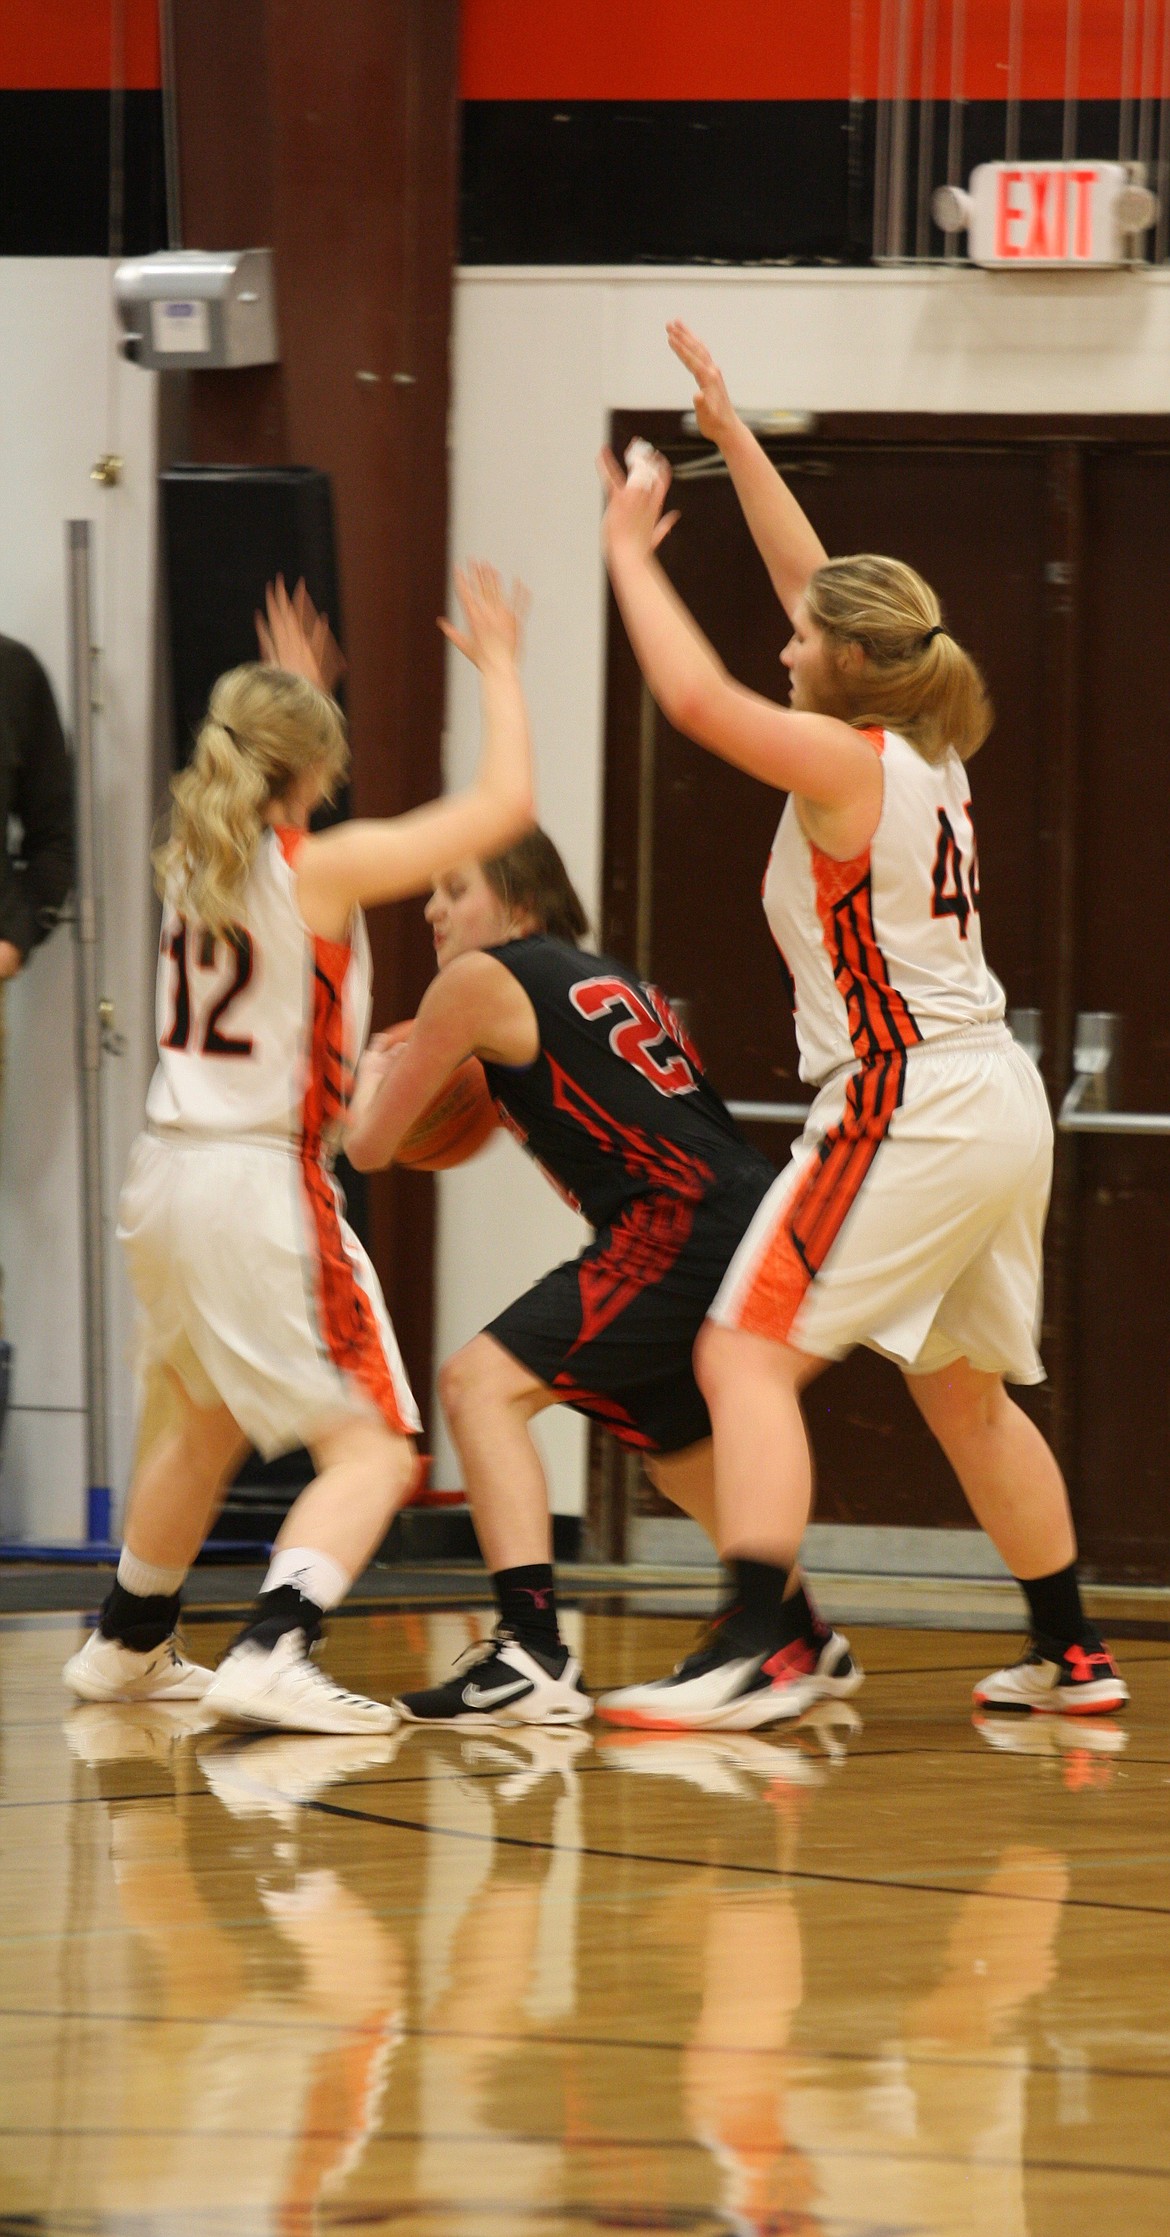 Lindsay Laws (12) and Jessica Thompson guard Kalien Lien (20).